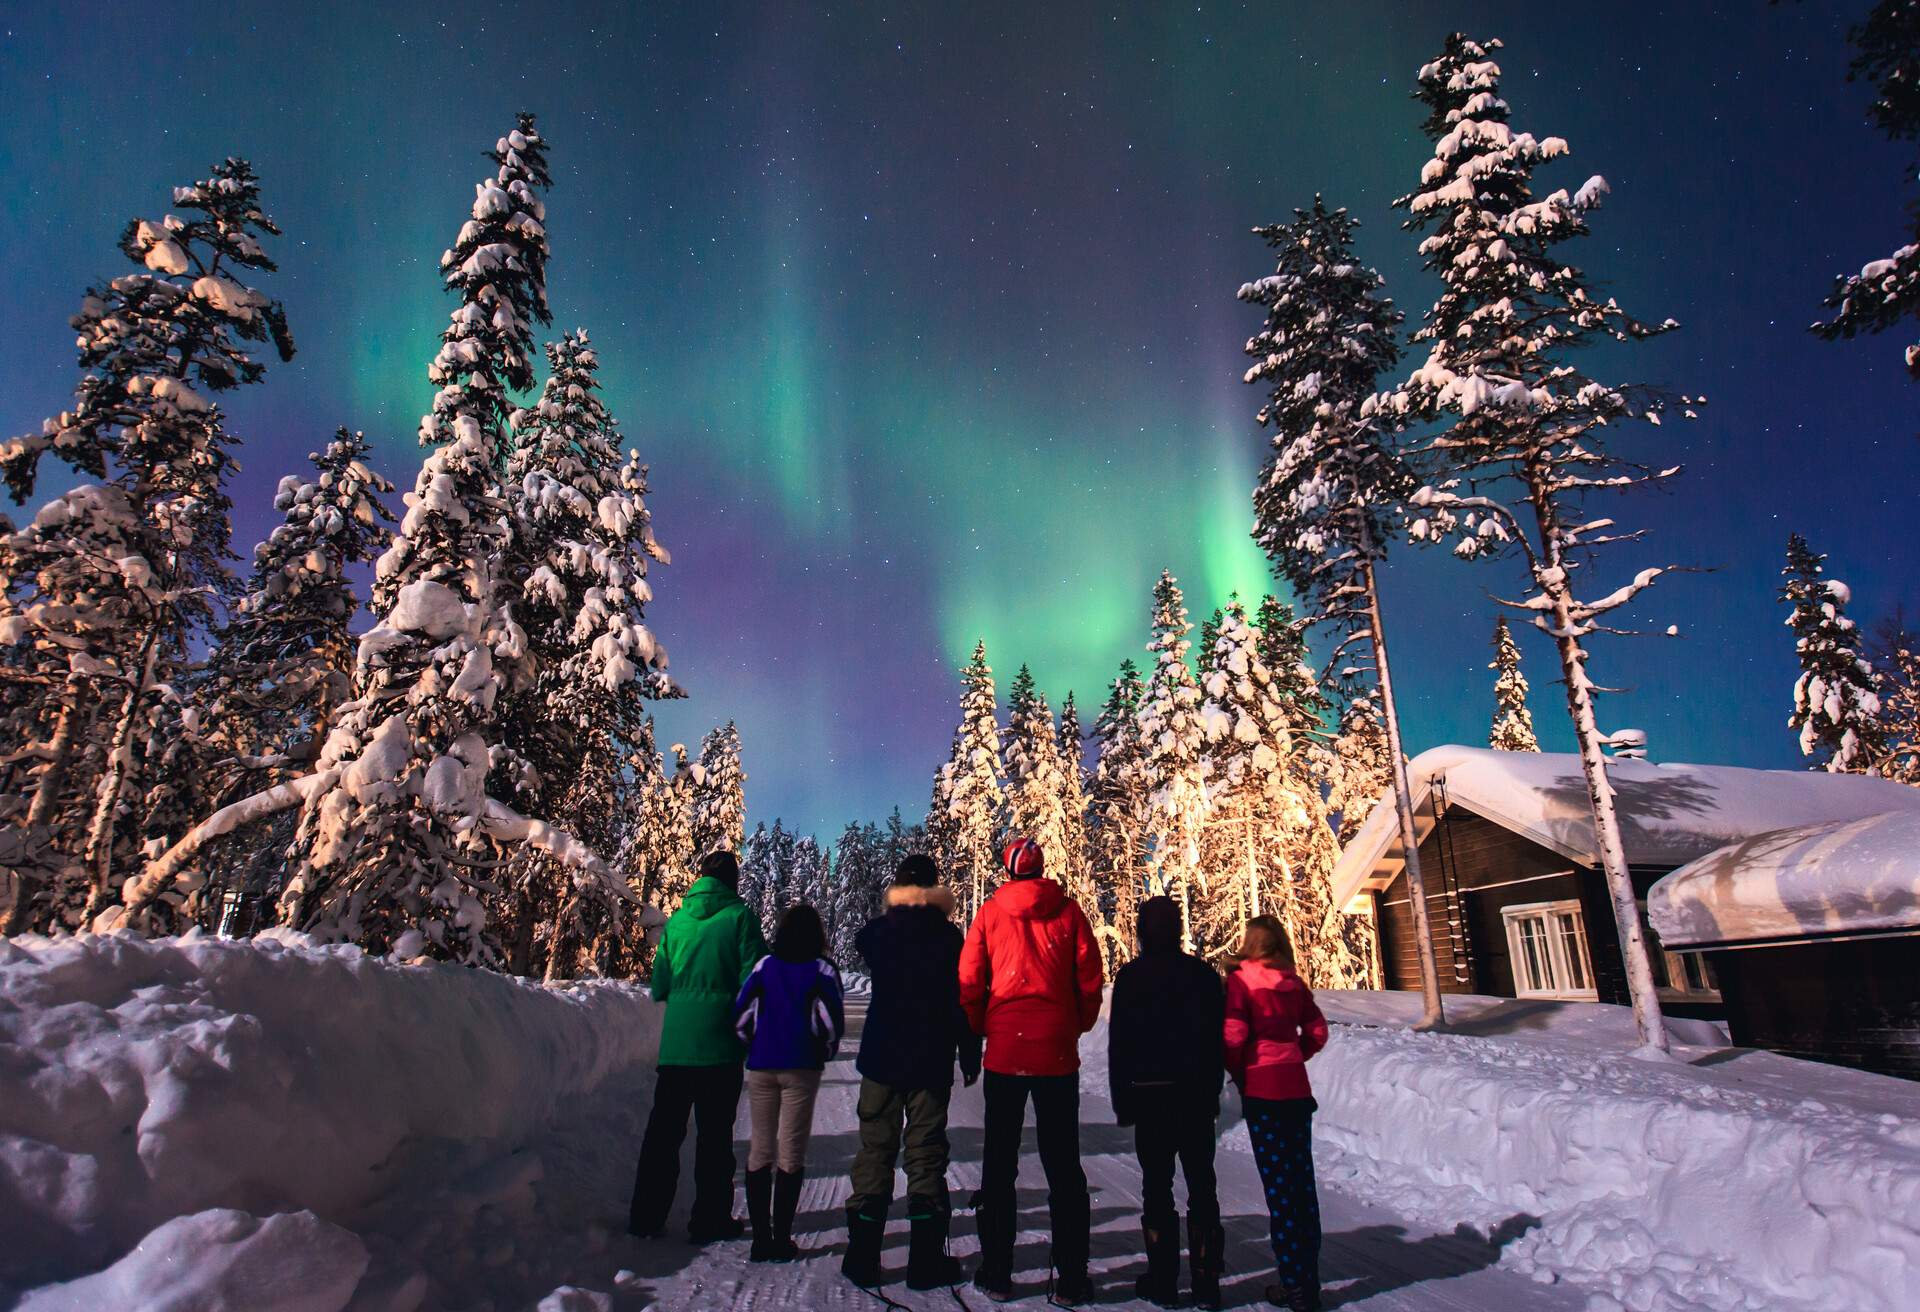 A group of people standing on a snowy path with tall trees and looking up to the sky to admire the northern lights.